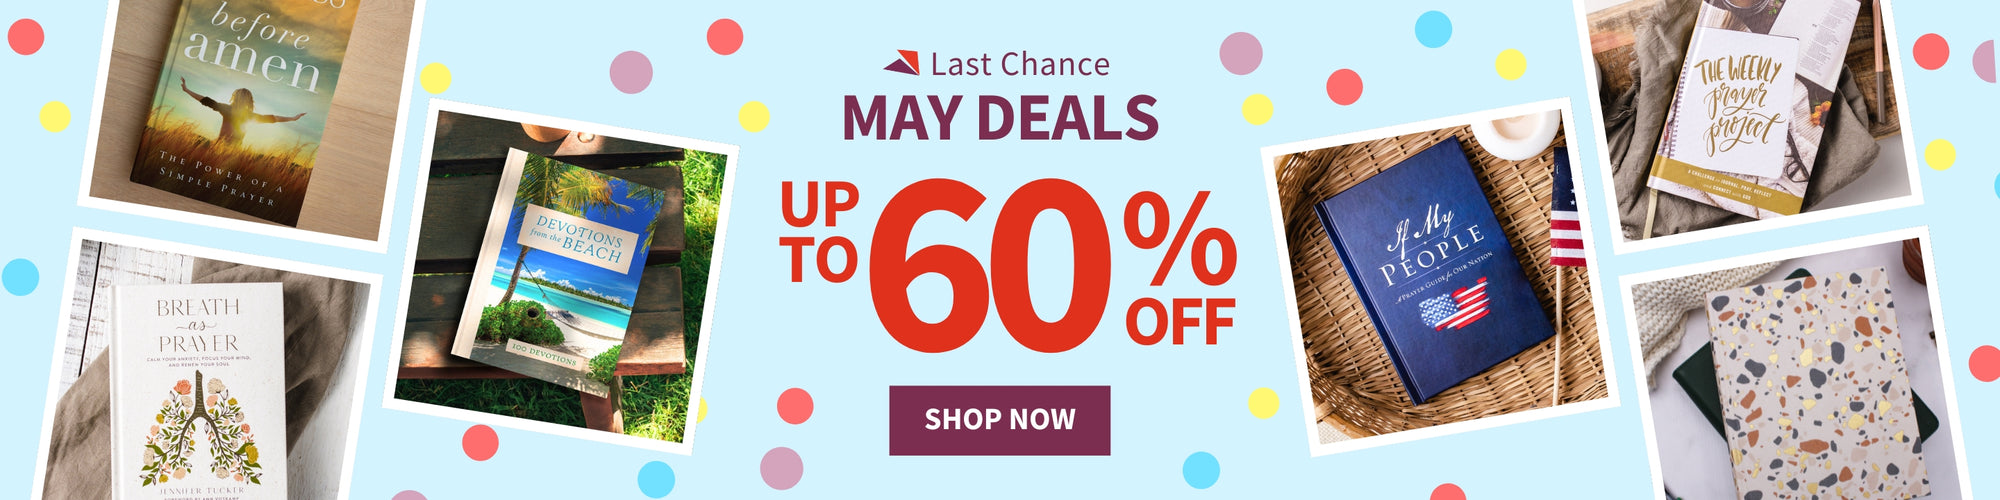 Last Chance May Deals Up to 60% Off Shop Now